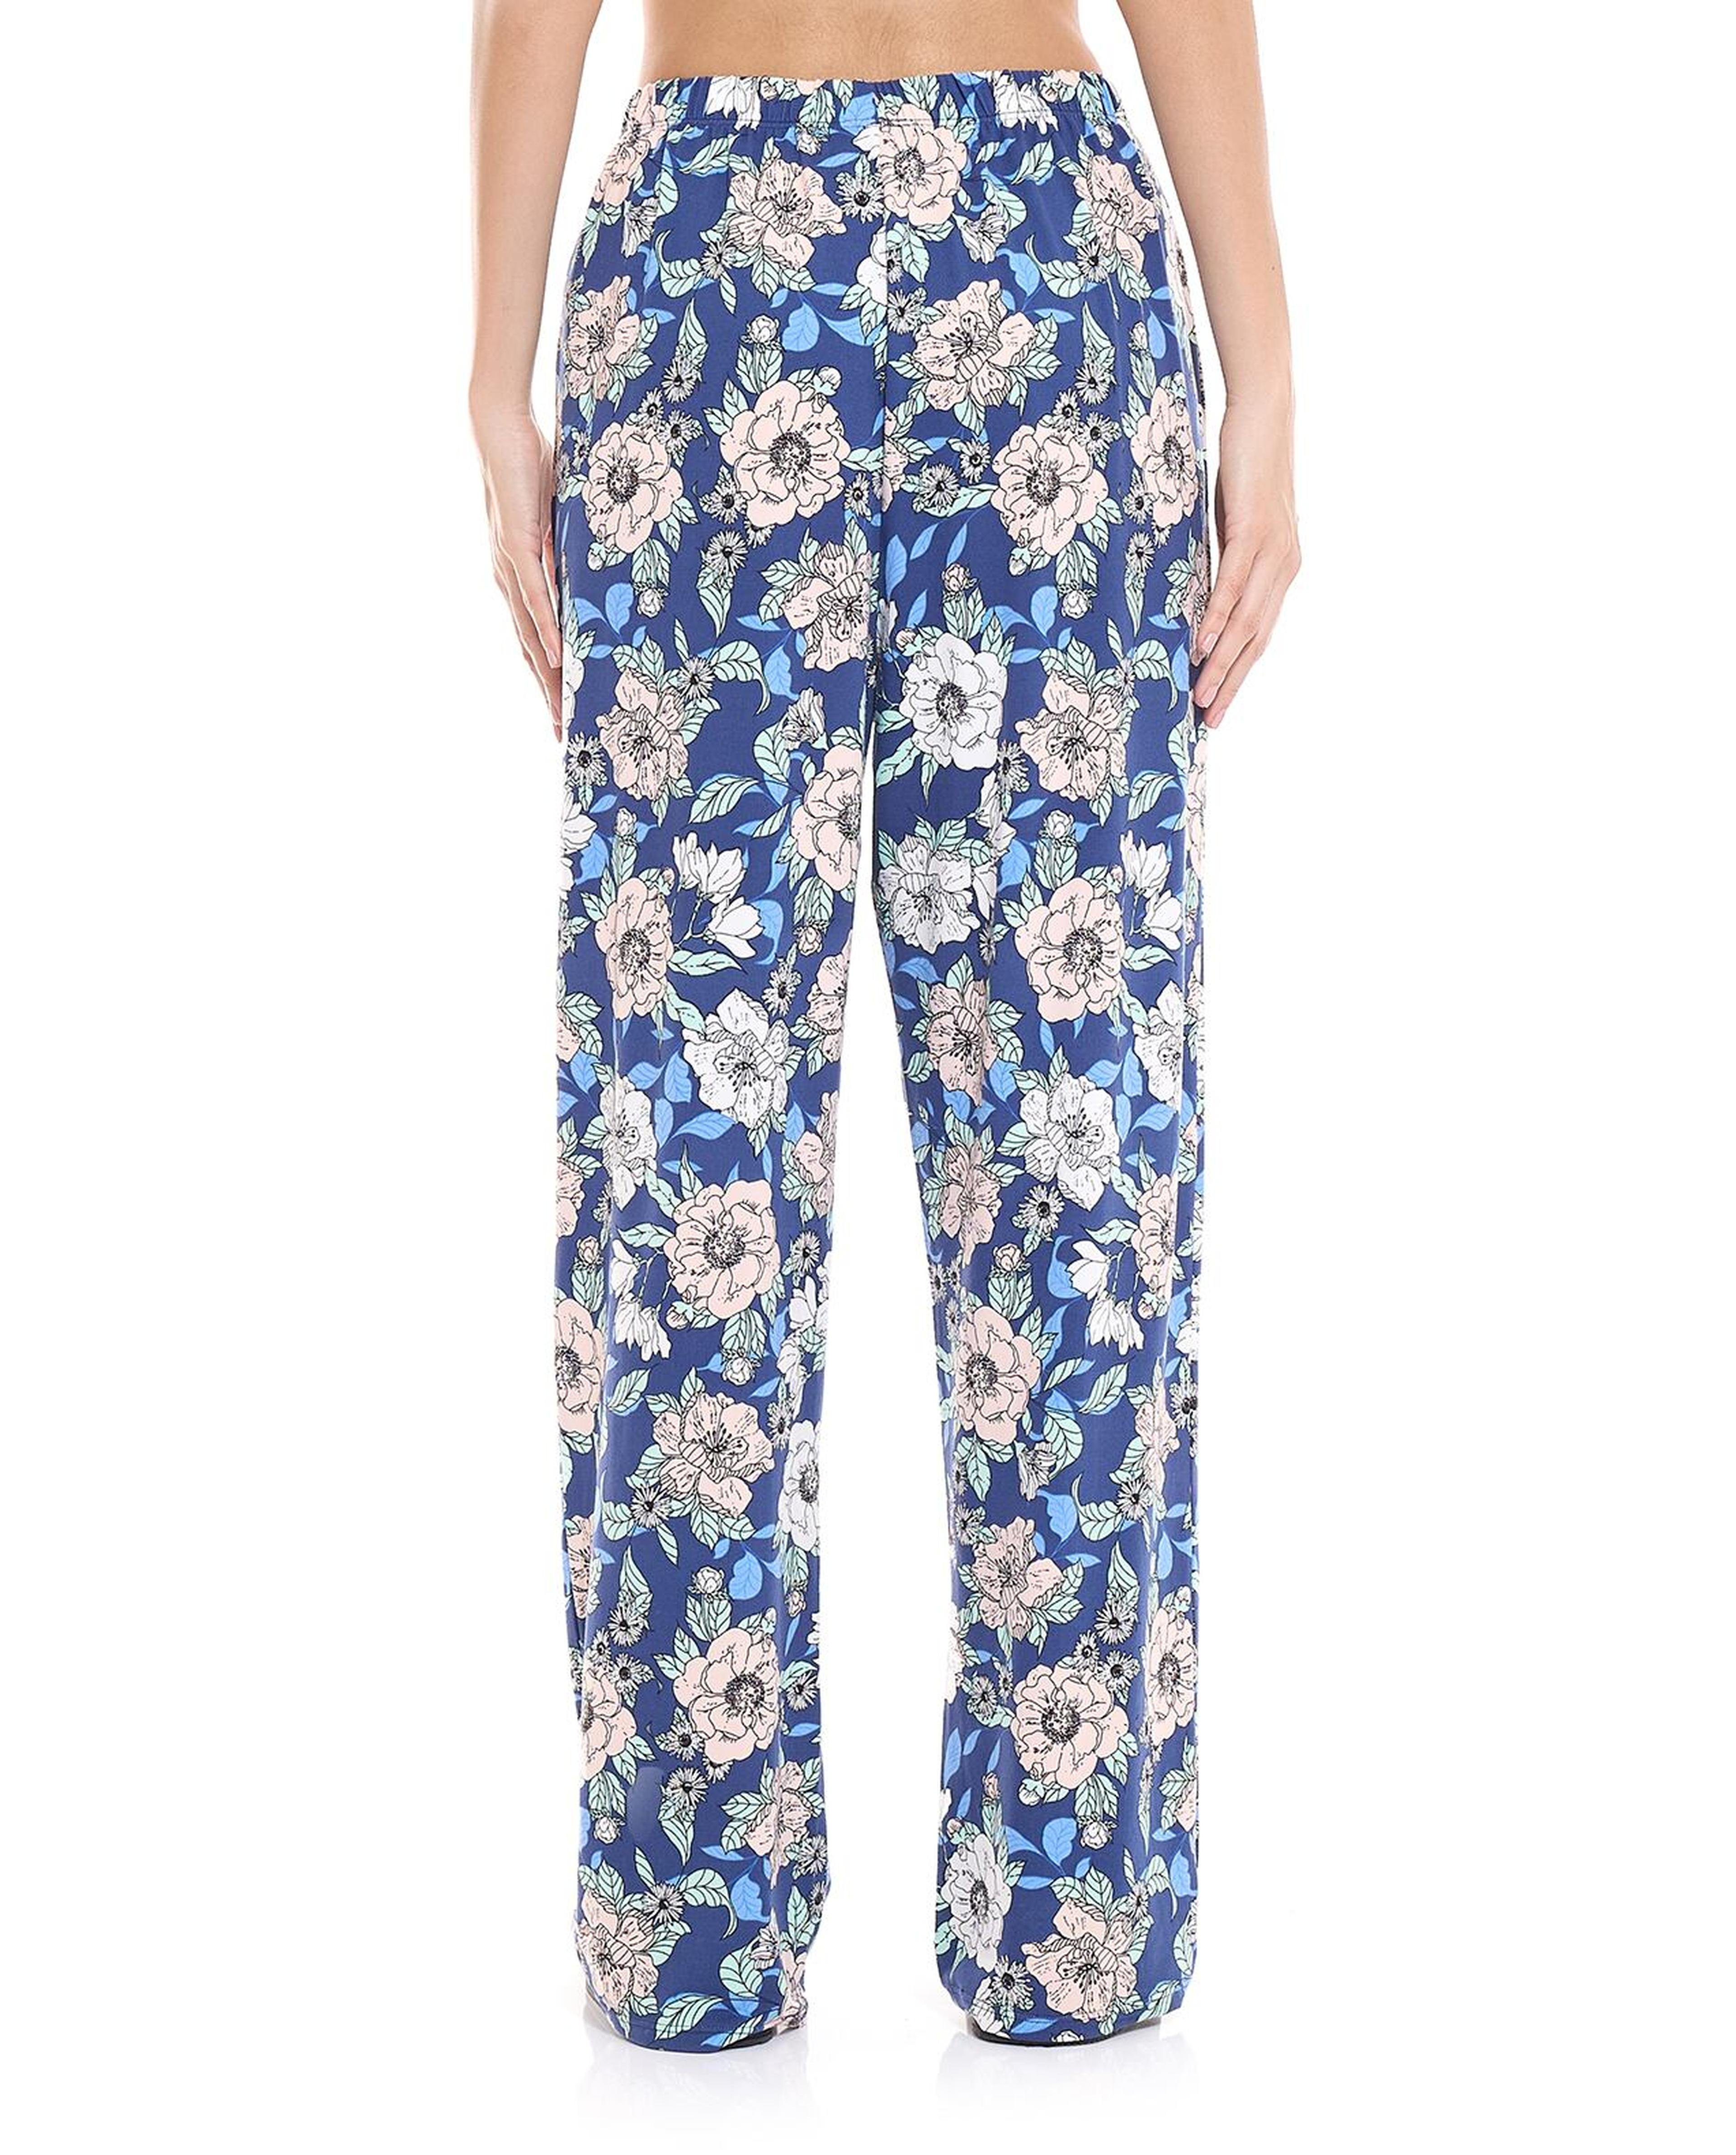 Floral Print Lounge Pants with Elastic Waist